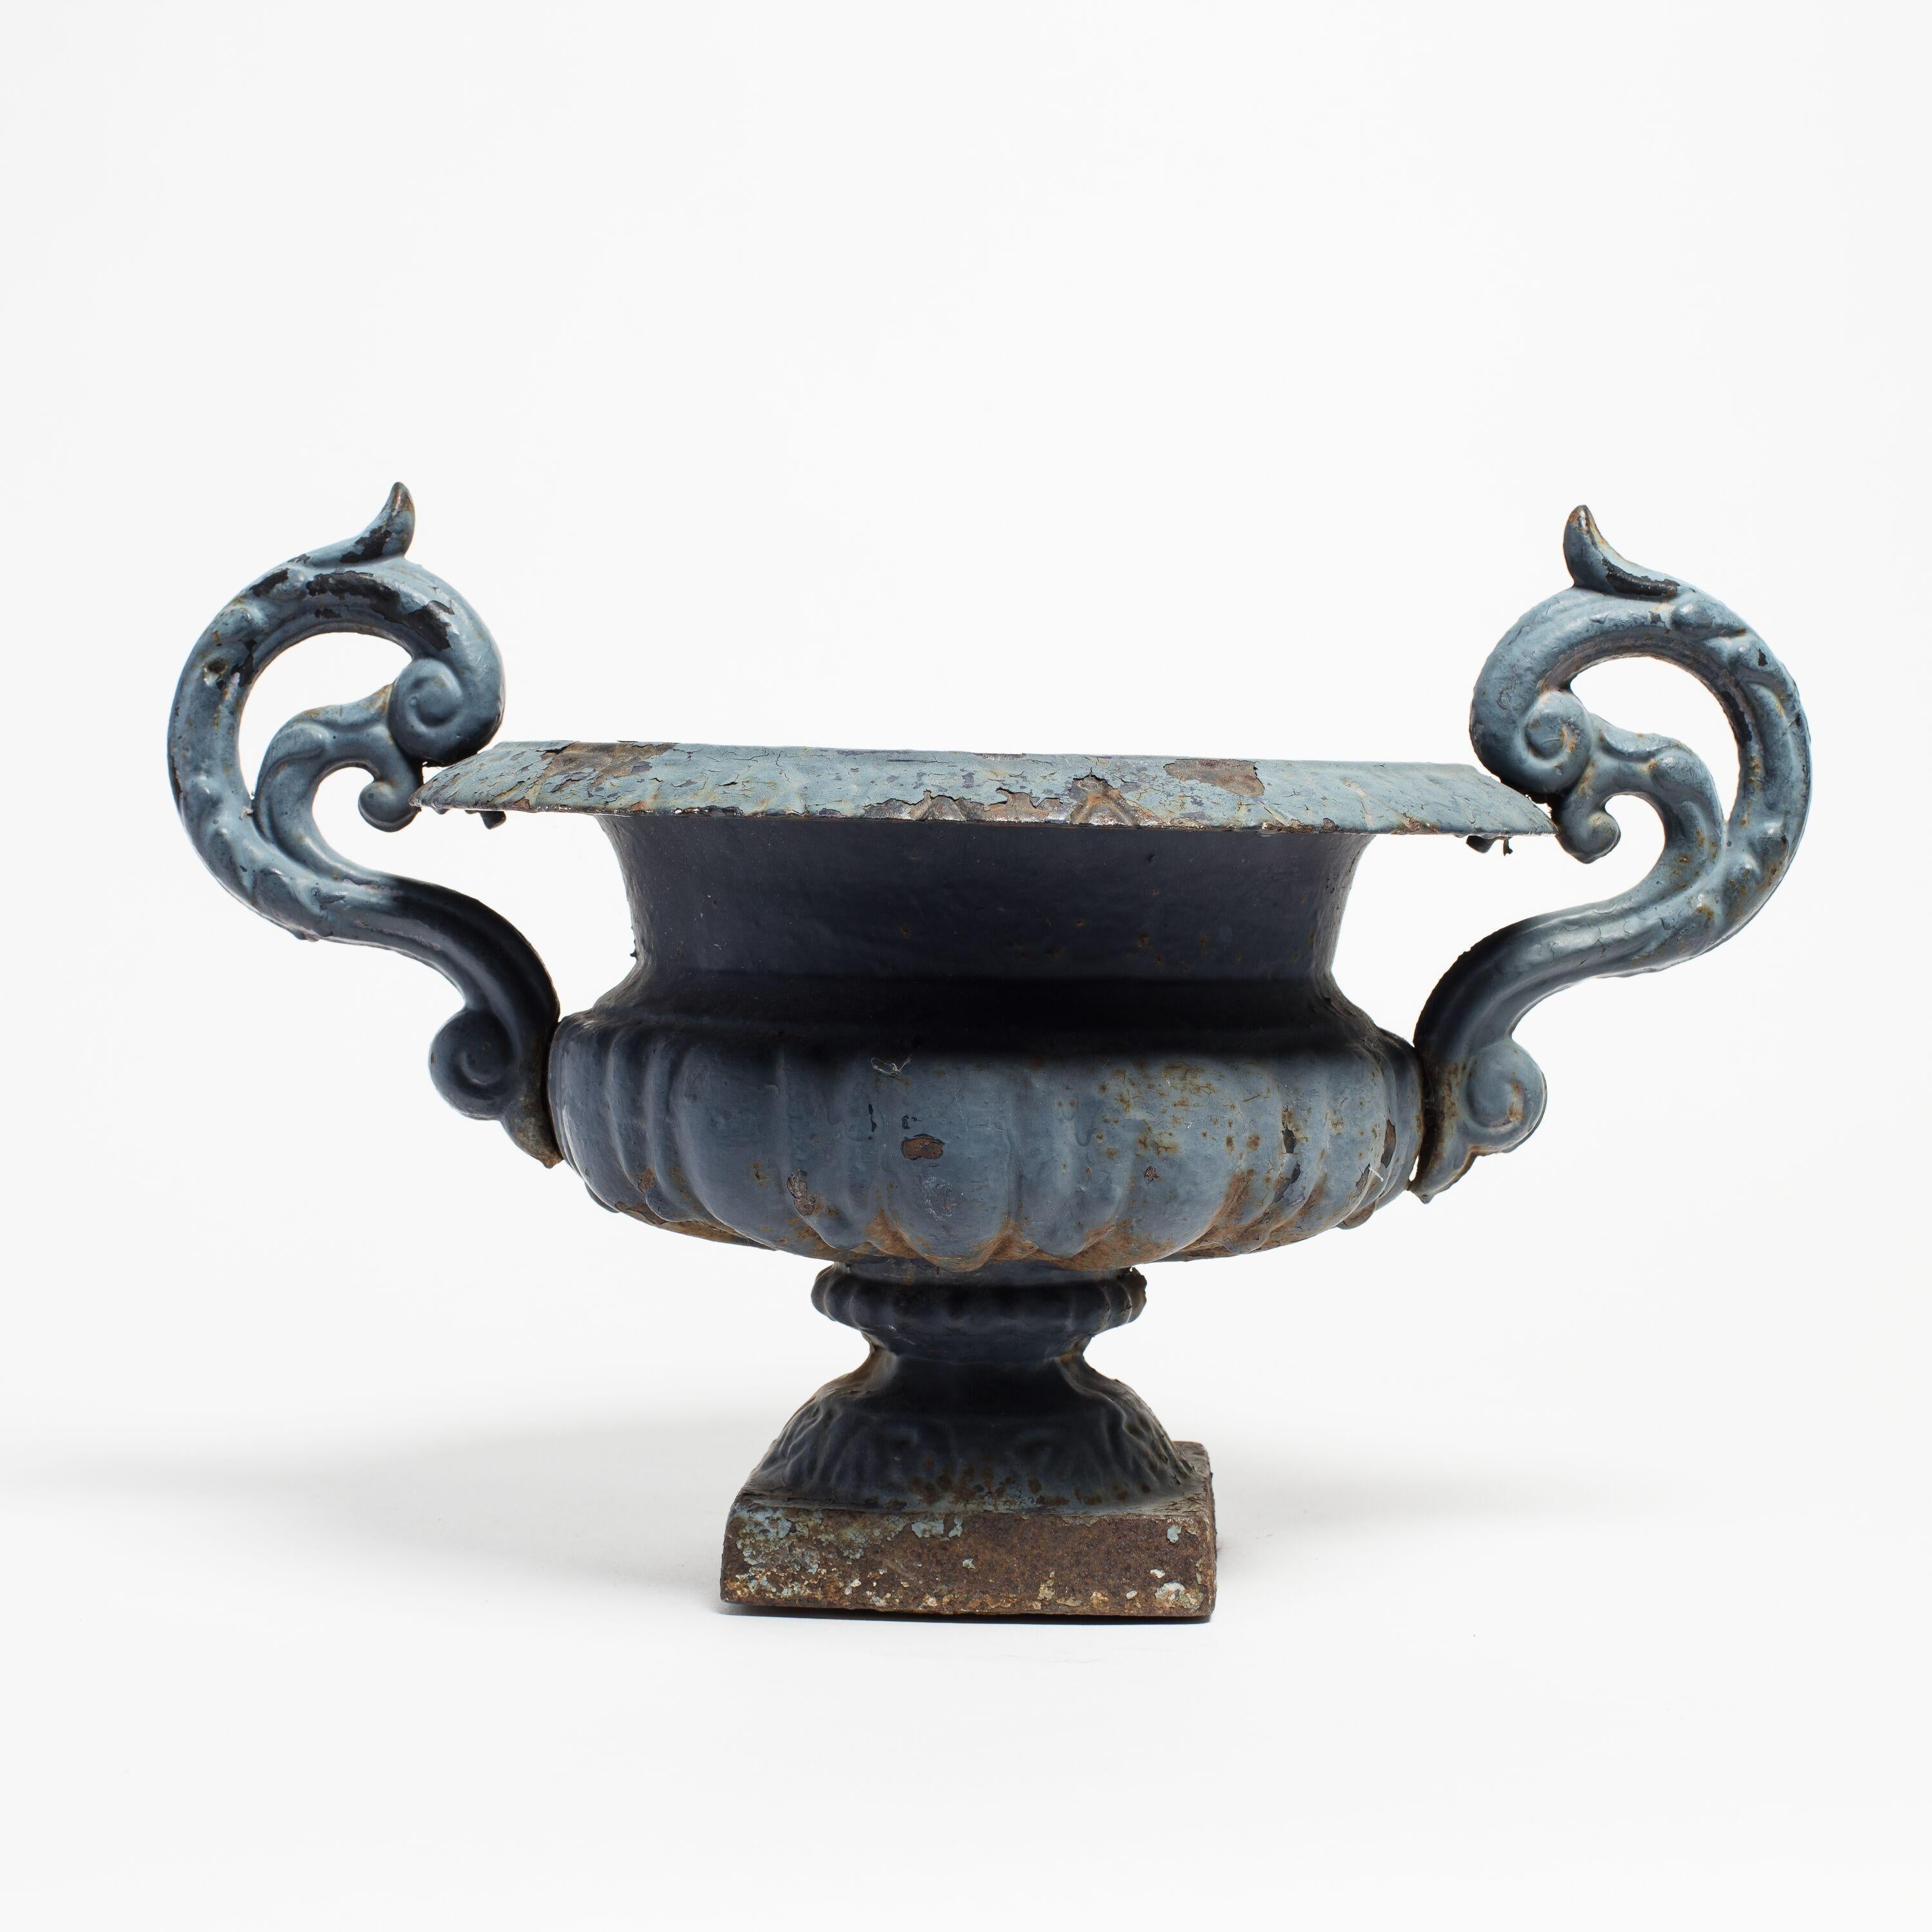 Neoclassical cast iron pedestal urn, made in France circa 1880. Striking blue enamel finish with a patina from age and weathering. This traditional garden element is ideal for elevating greenery. Discovered in the private collection of a dealer in